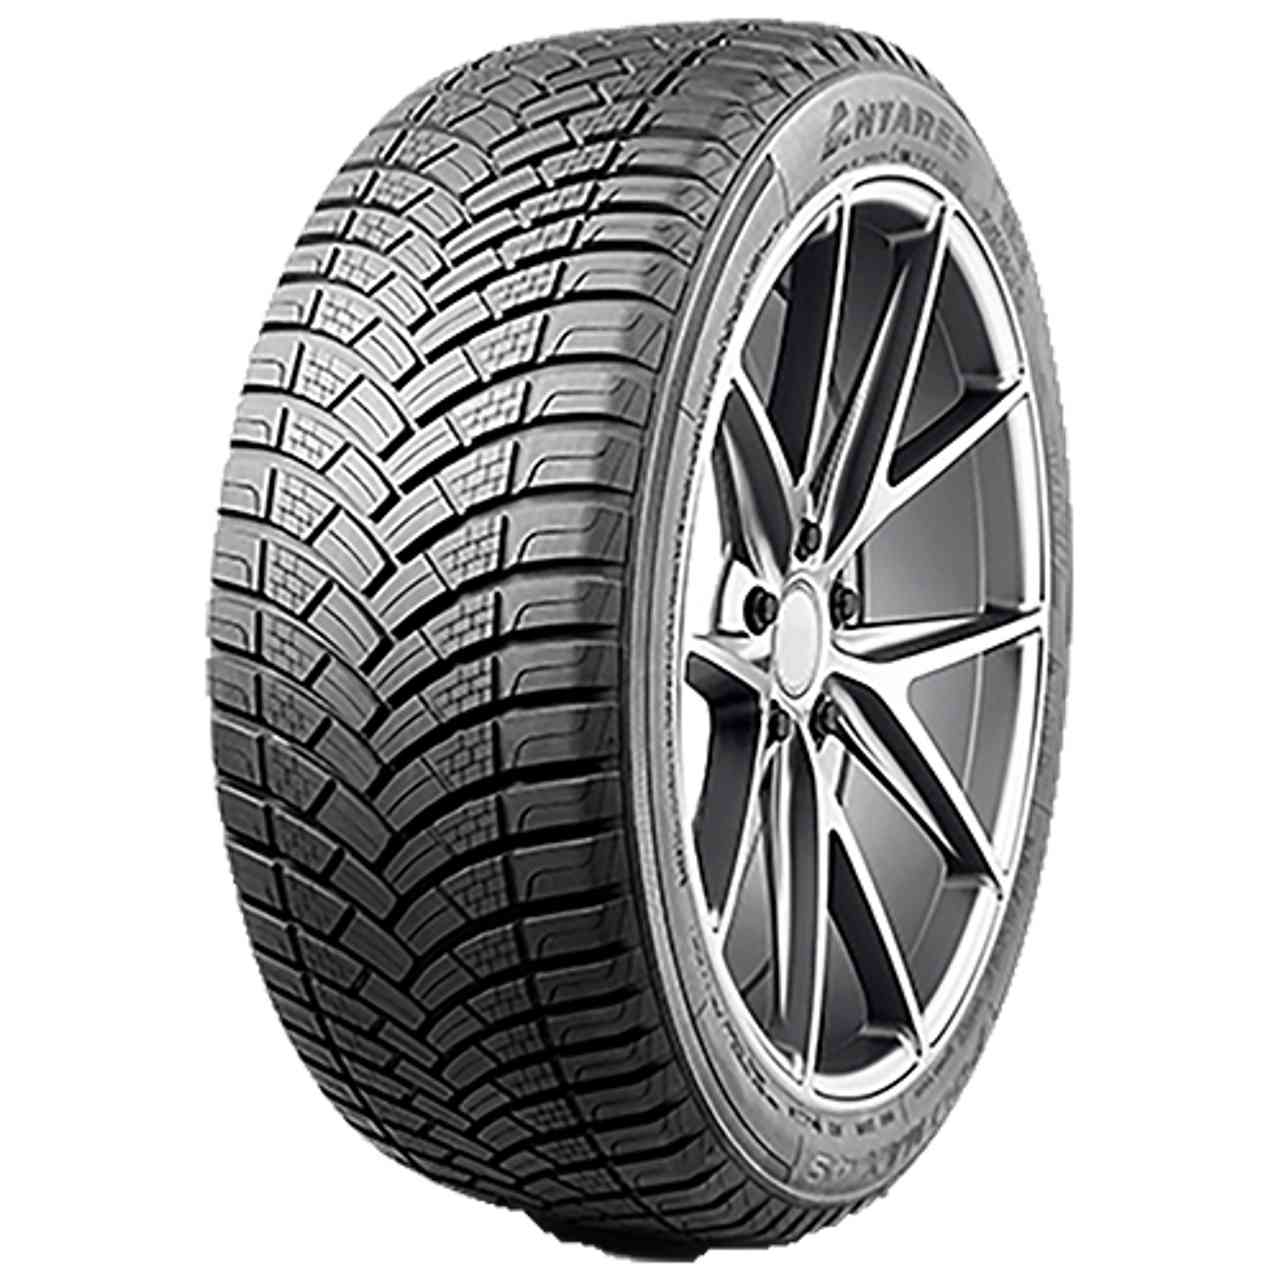 ANTARES POLYMAX 4S 215/55R17 98V BSW